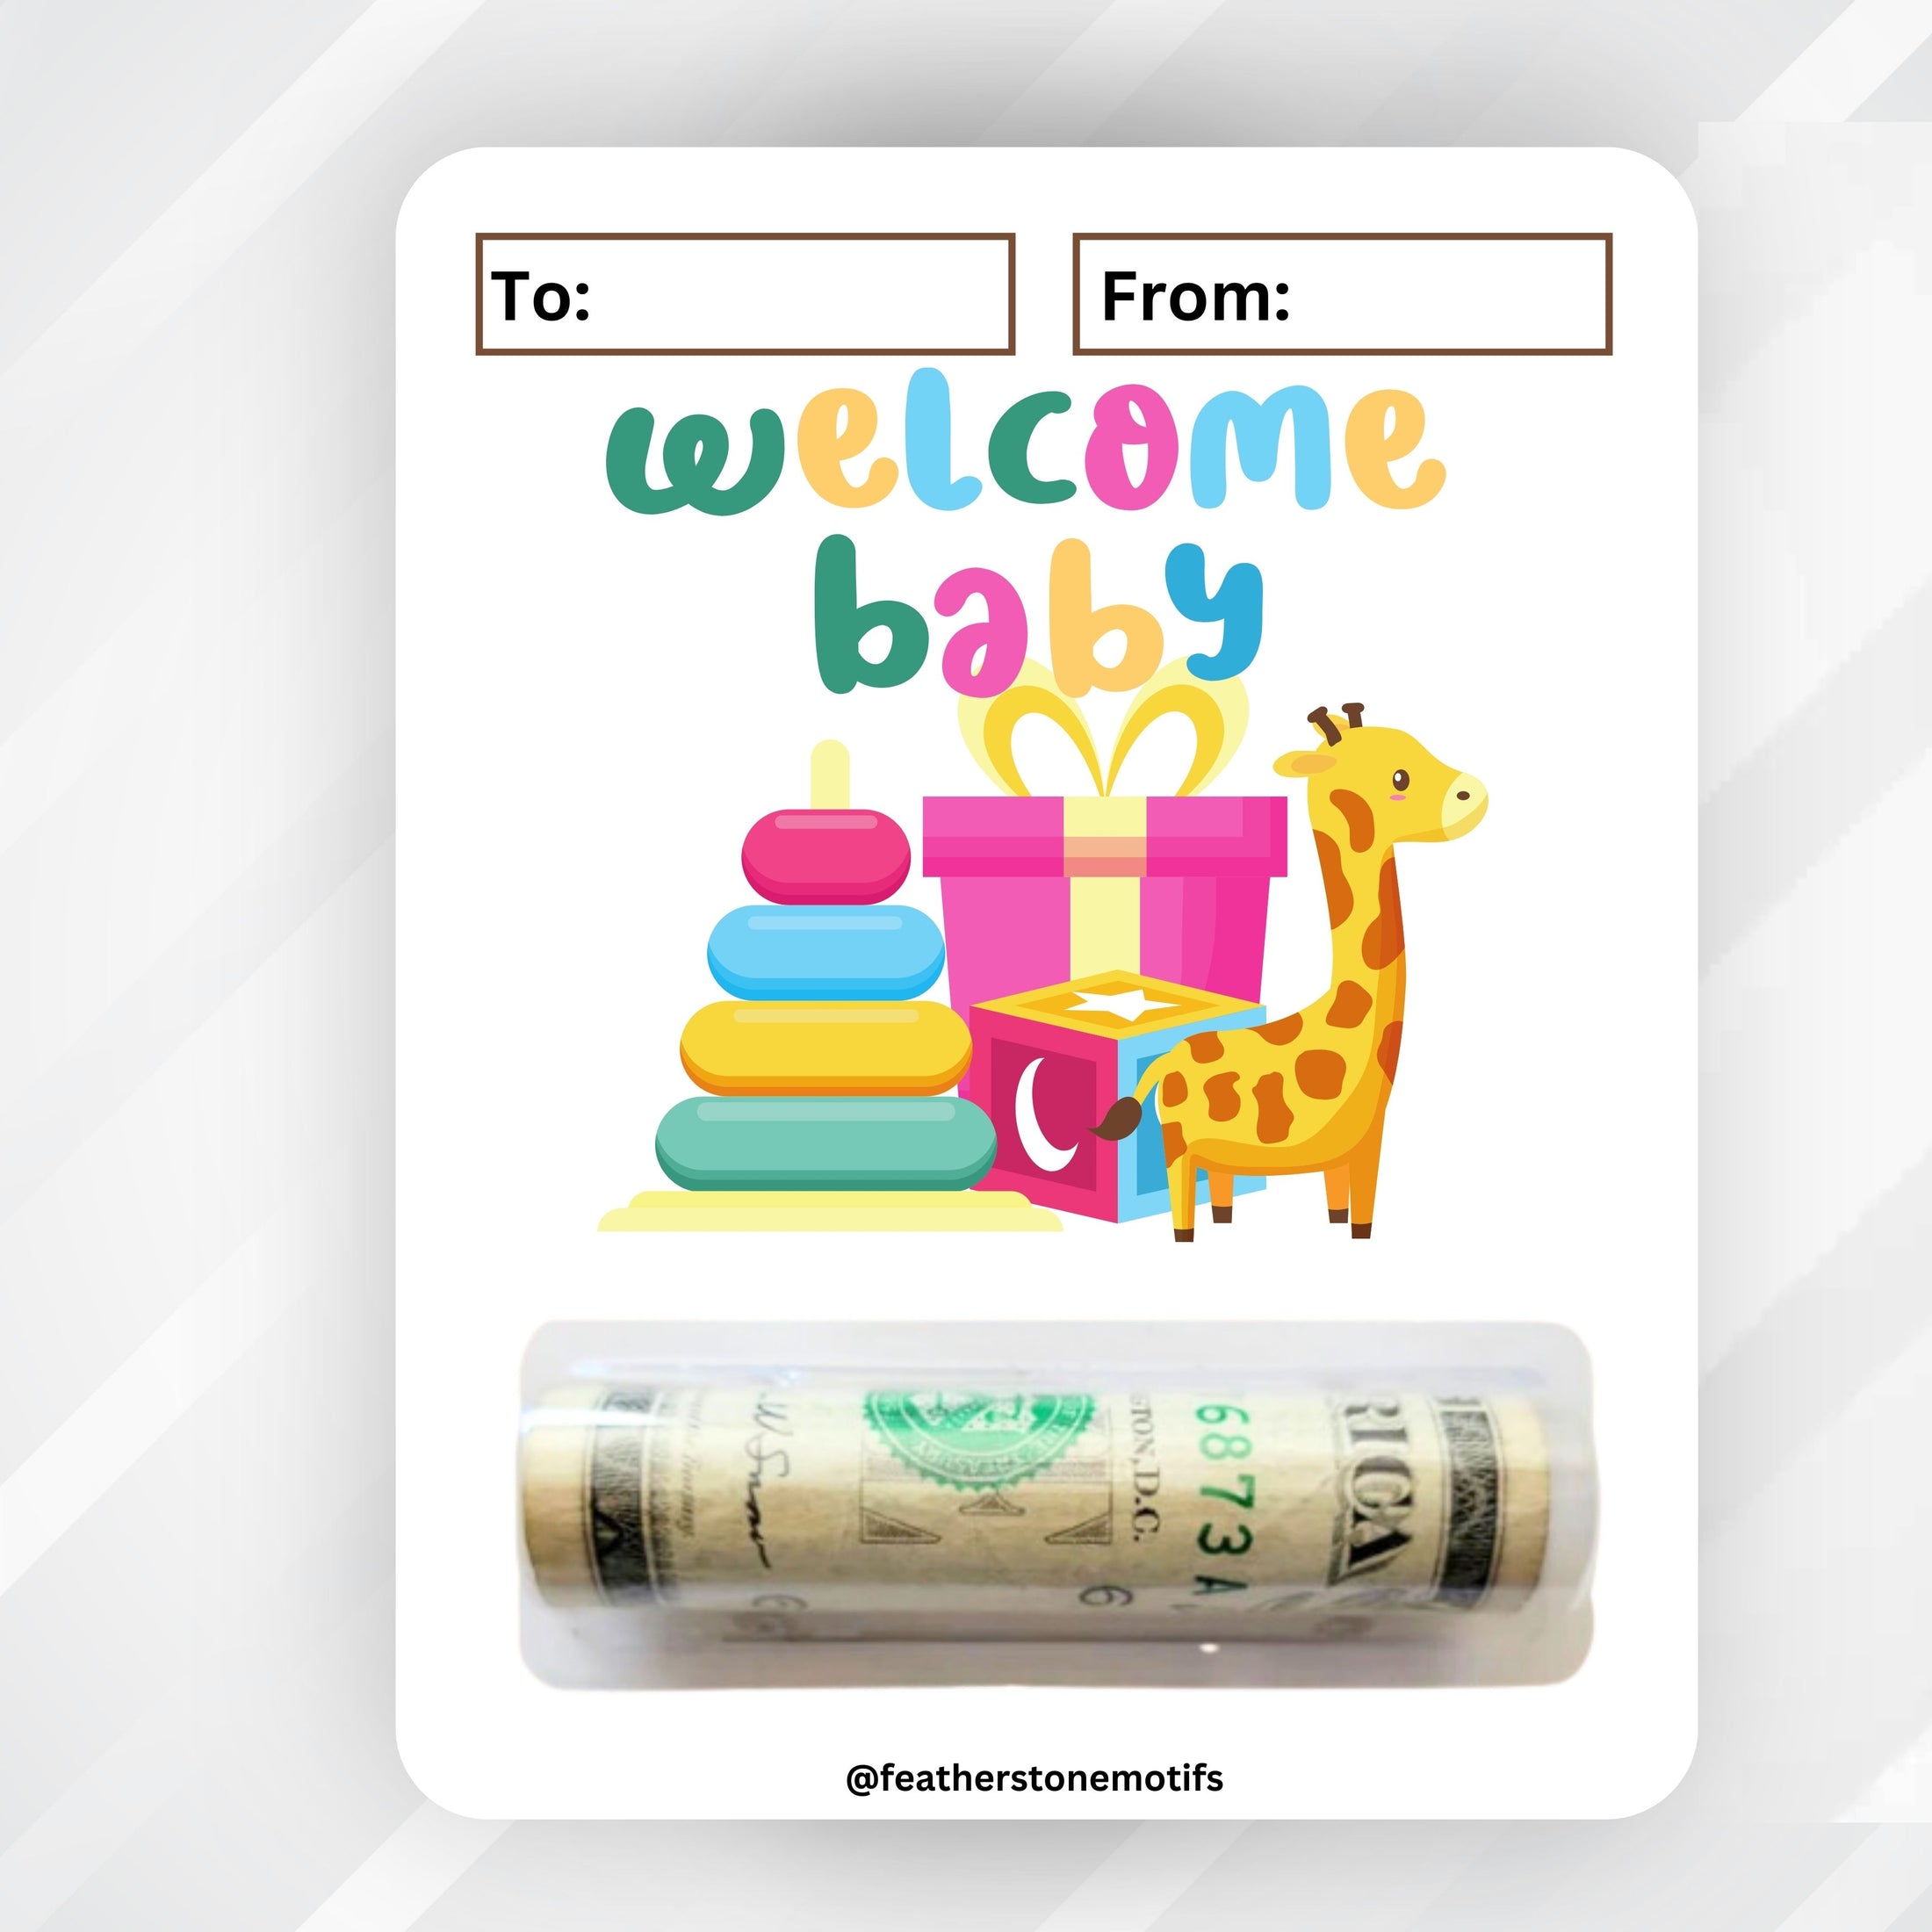 This image shows the money card attached to the Welcome Baby Money Card.